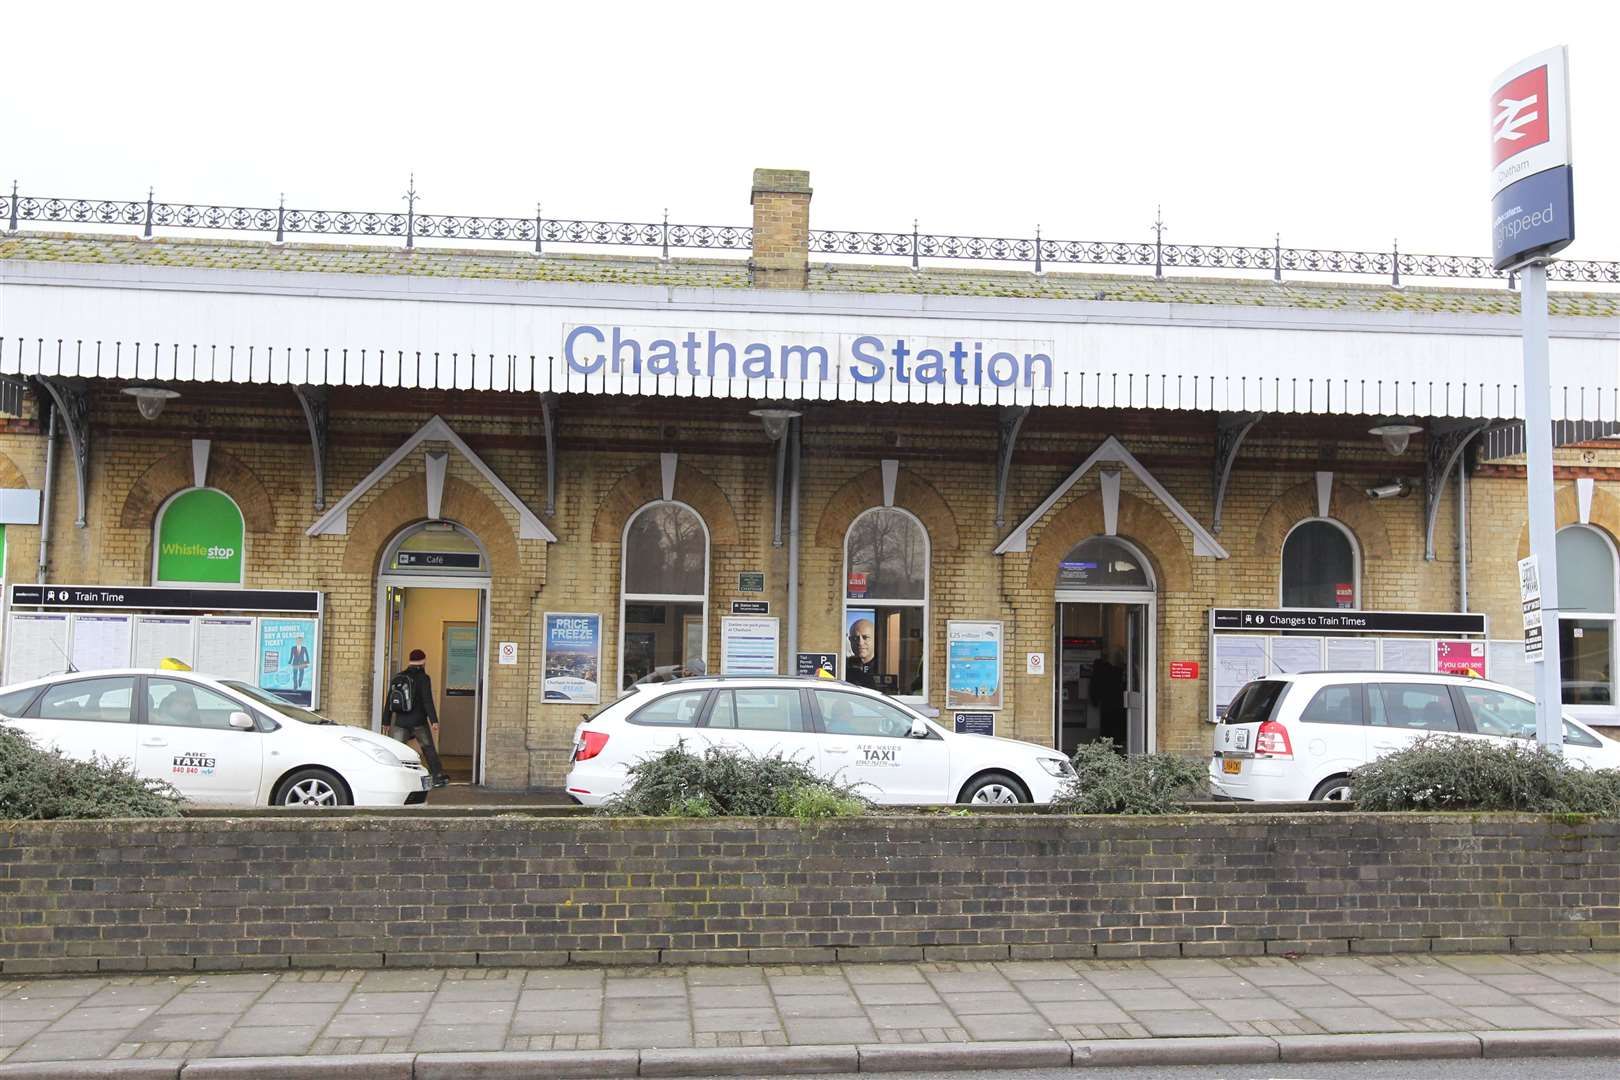 The man had just arrived at Chatham station. Picture: John Westhrop